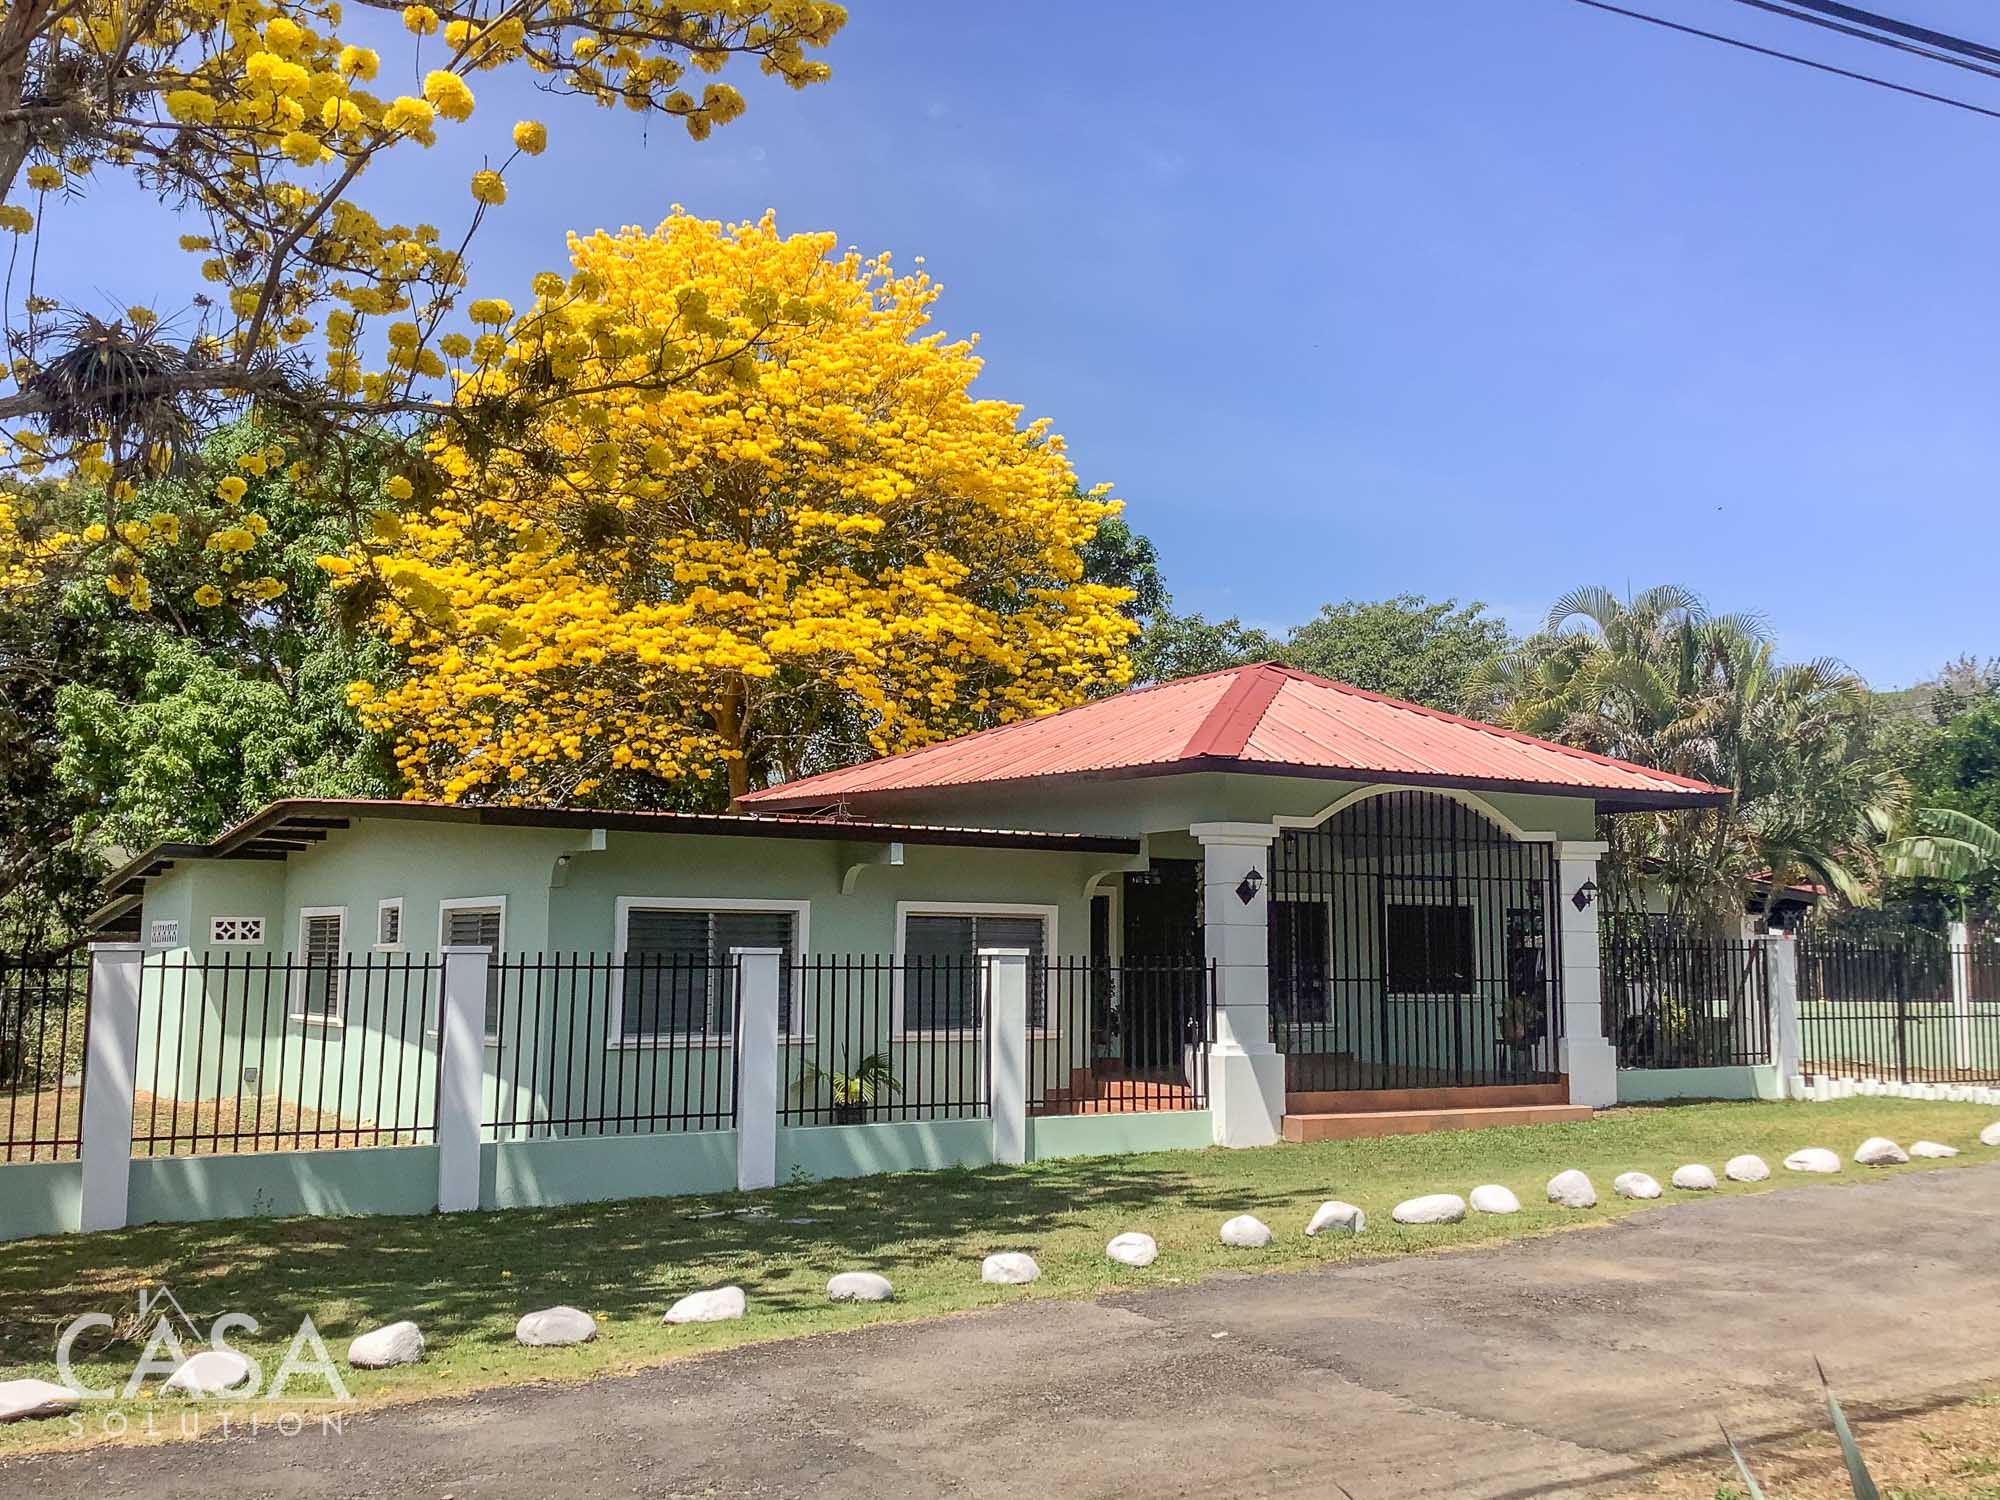 Inviting Property for Sale in Los Algarrobos Just a 10-minute Drive from David, Chiriqui. Featuring Lush Landscaping, Rustic Elegance, and a Covered Terrace.